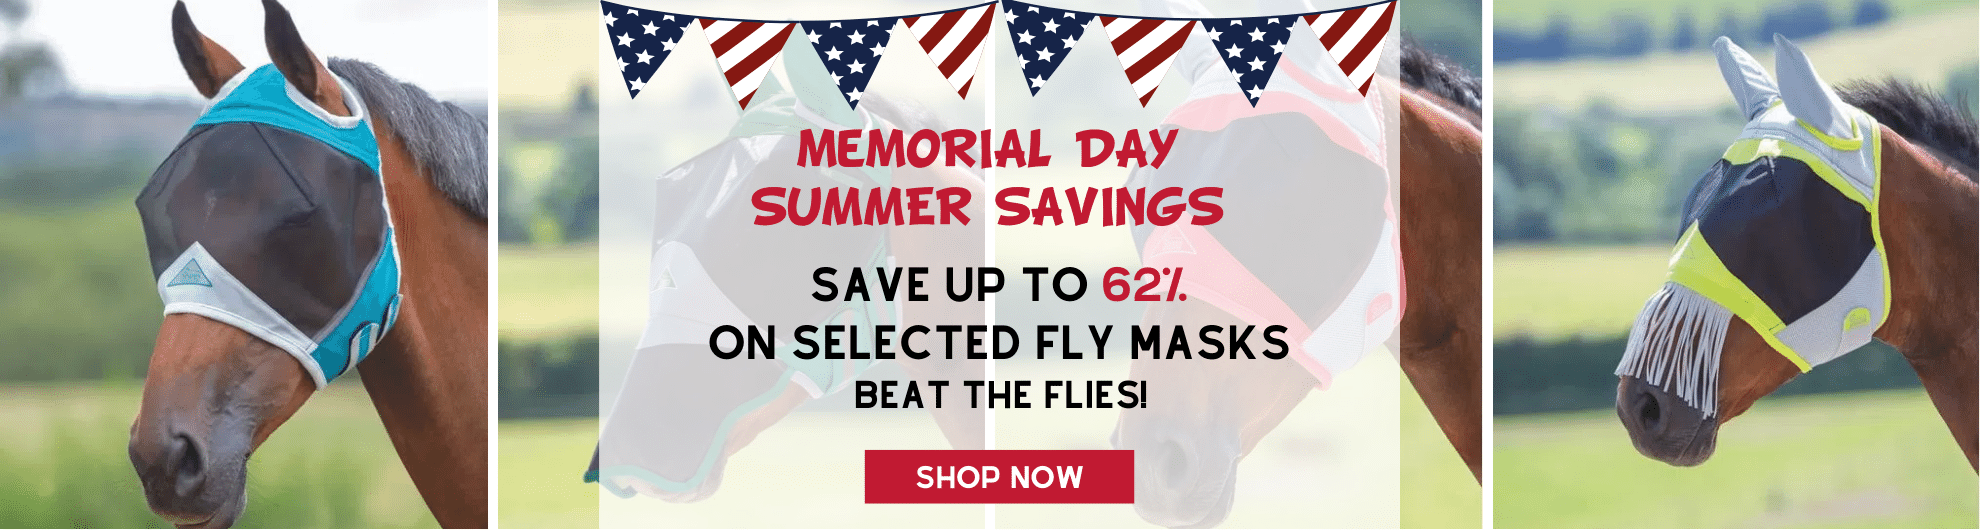 Memorial Day Sale - Fly Masks